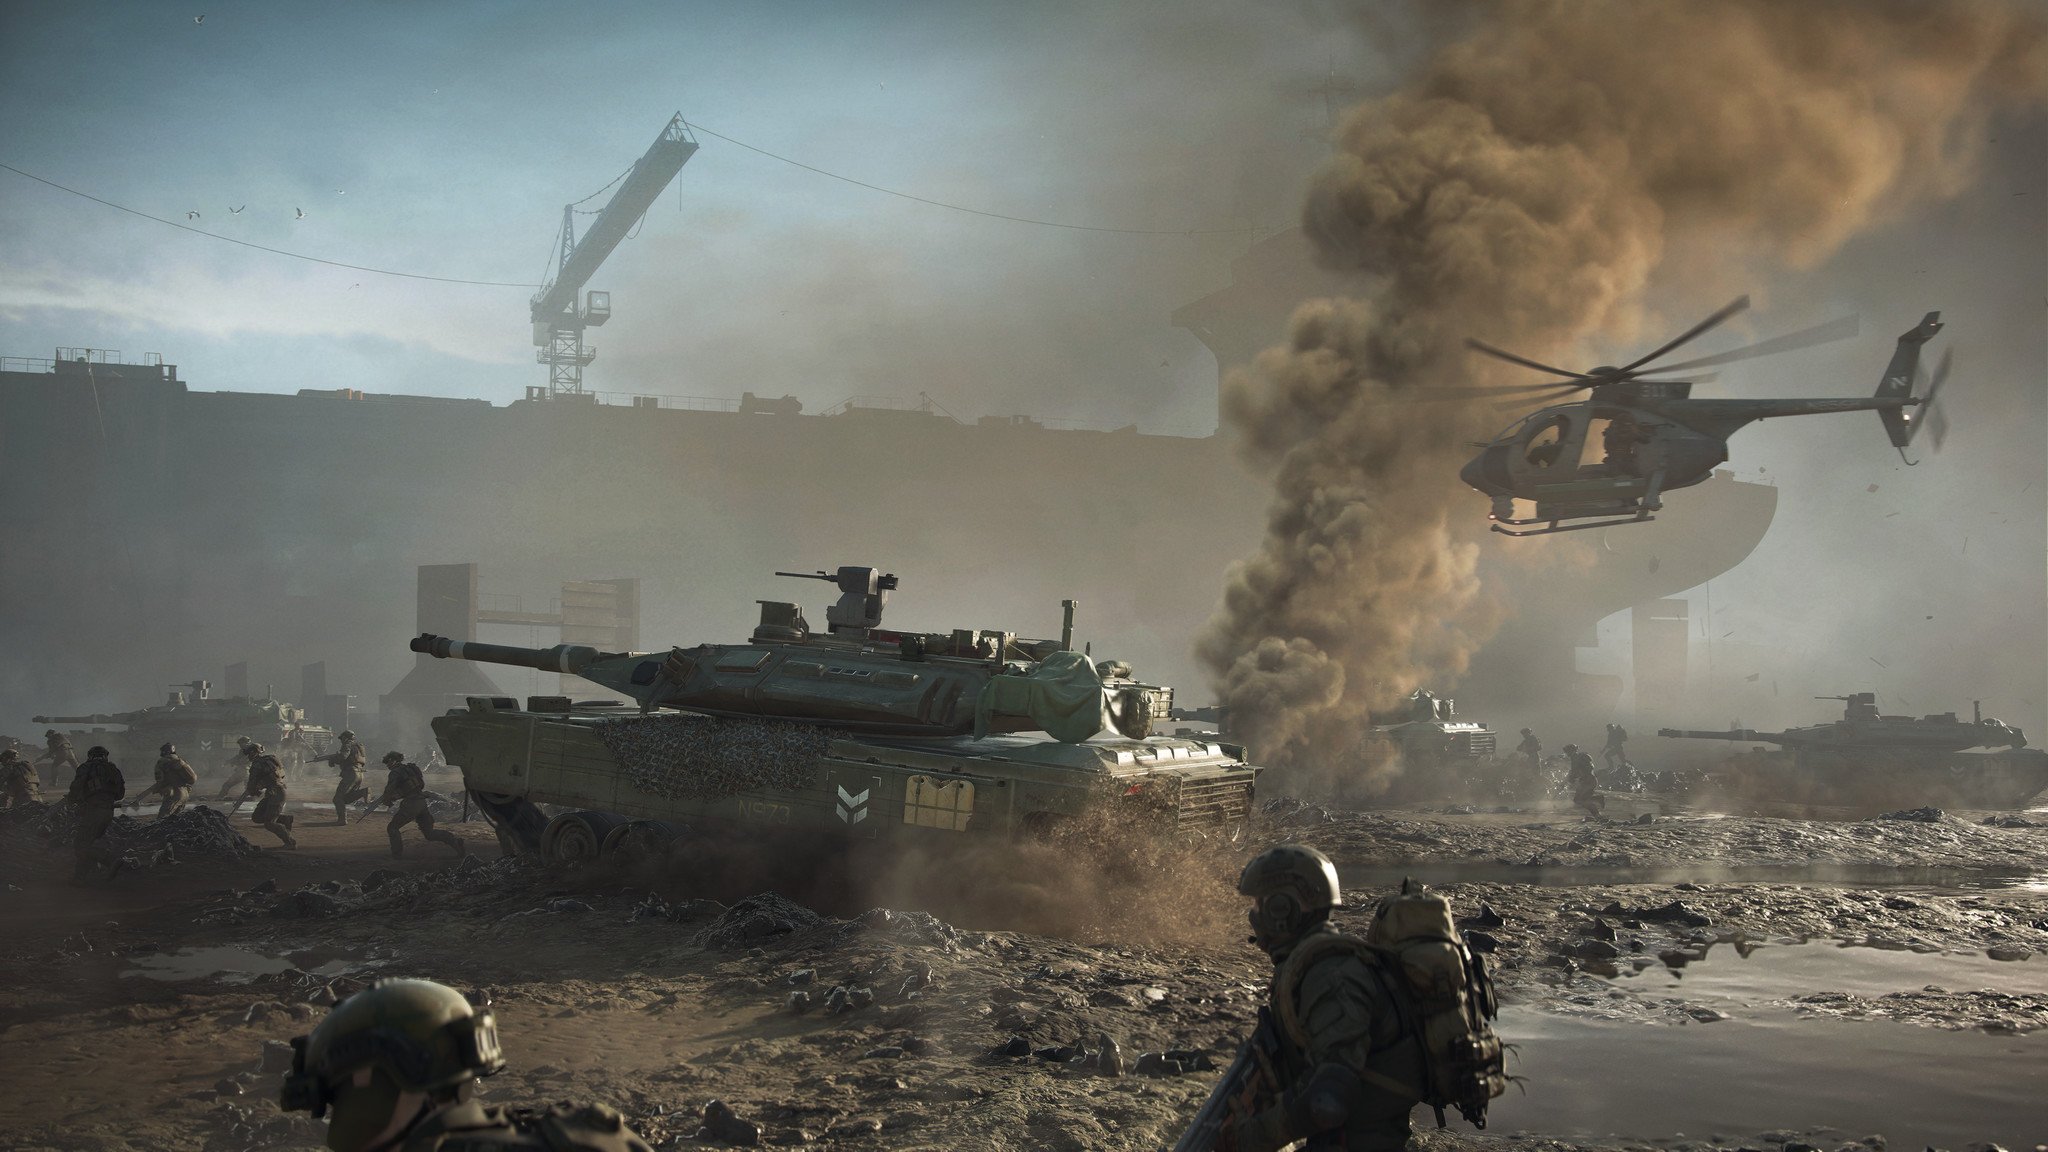 Battlefield 2042 PC requirements: Here are the recommended specs